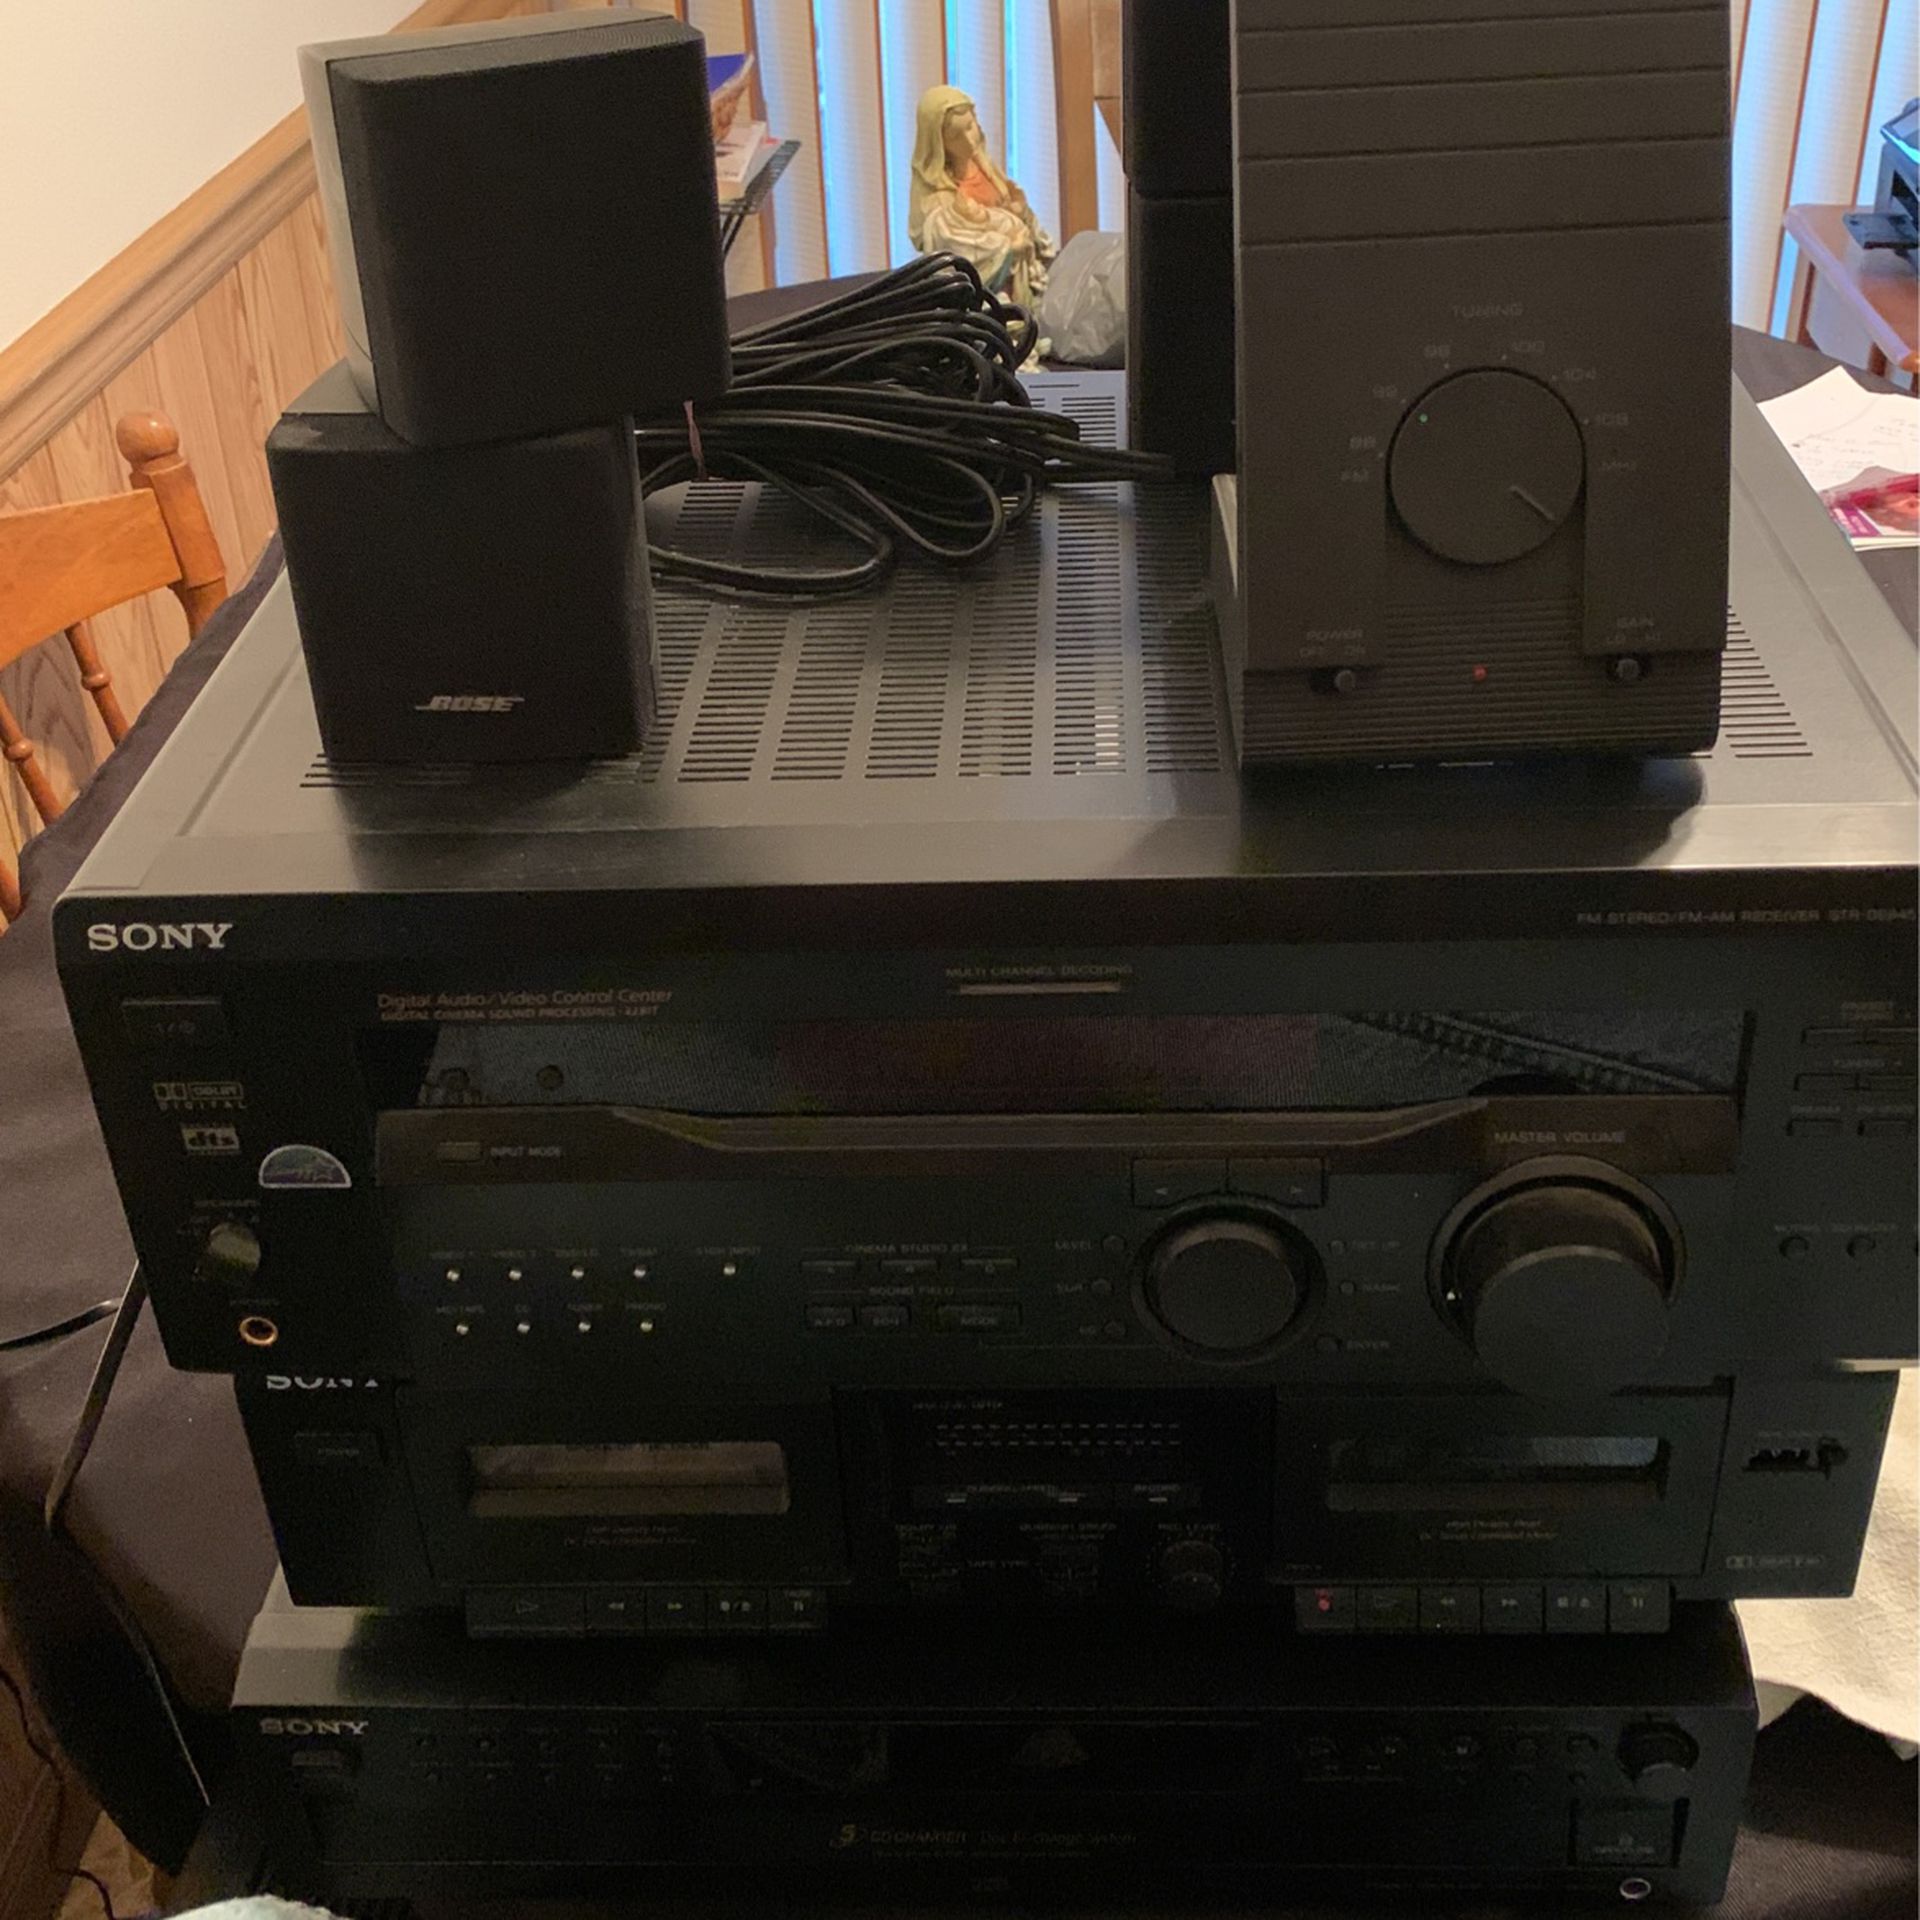 Sony STR-D715 video Receiver And Remote Control W/ Bose Surround Sons System With Power Sub